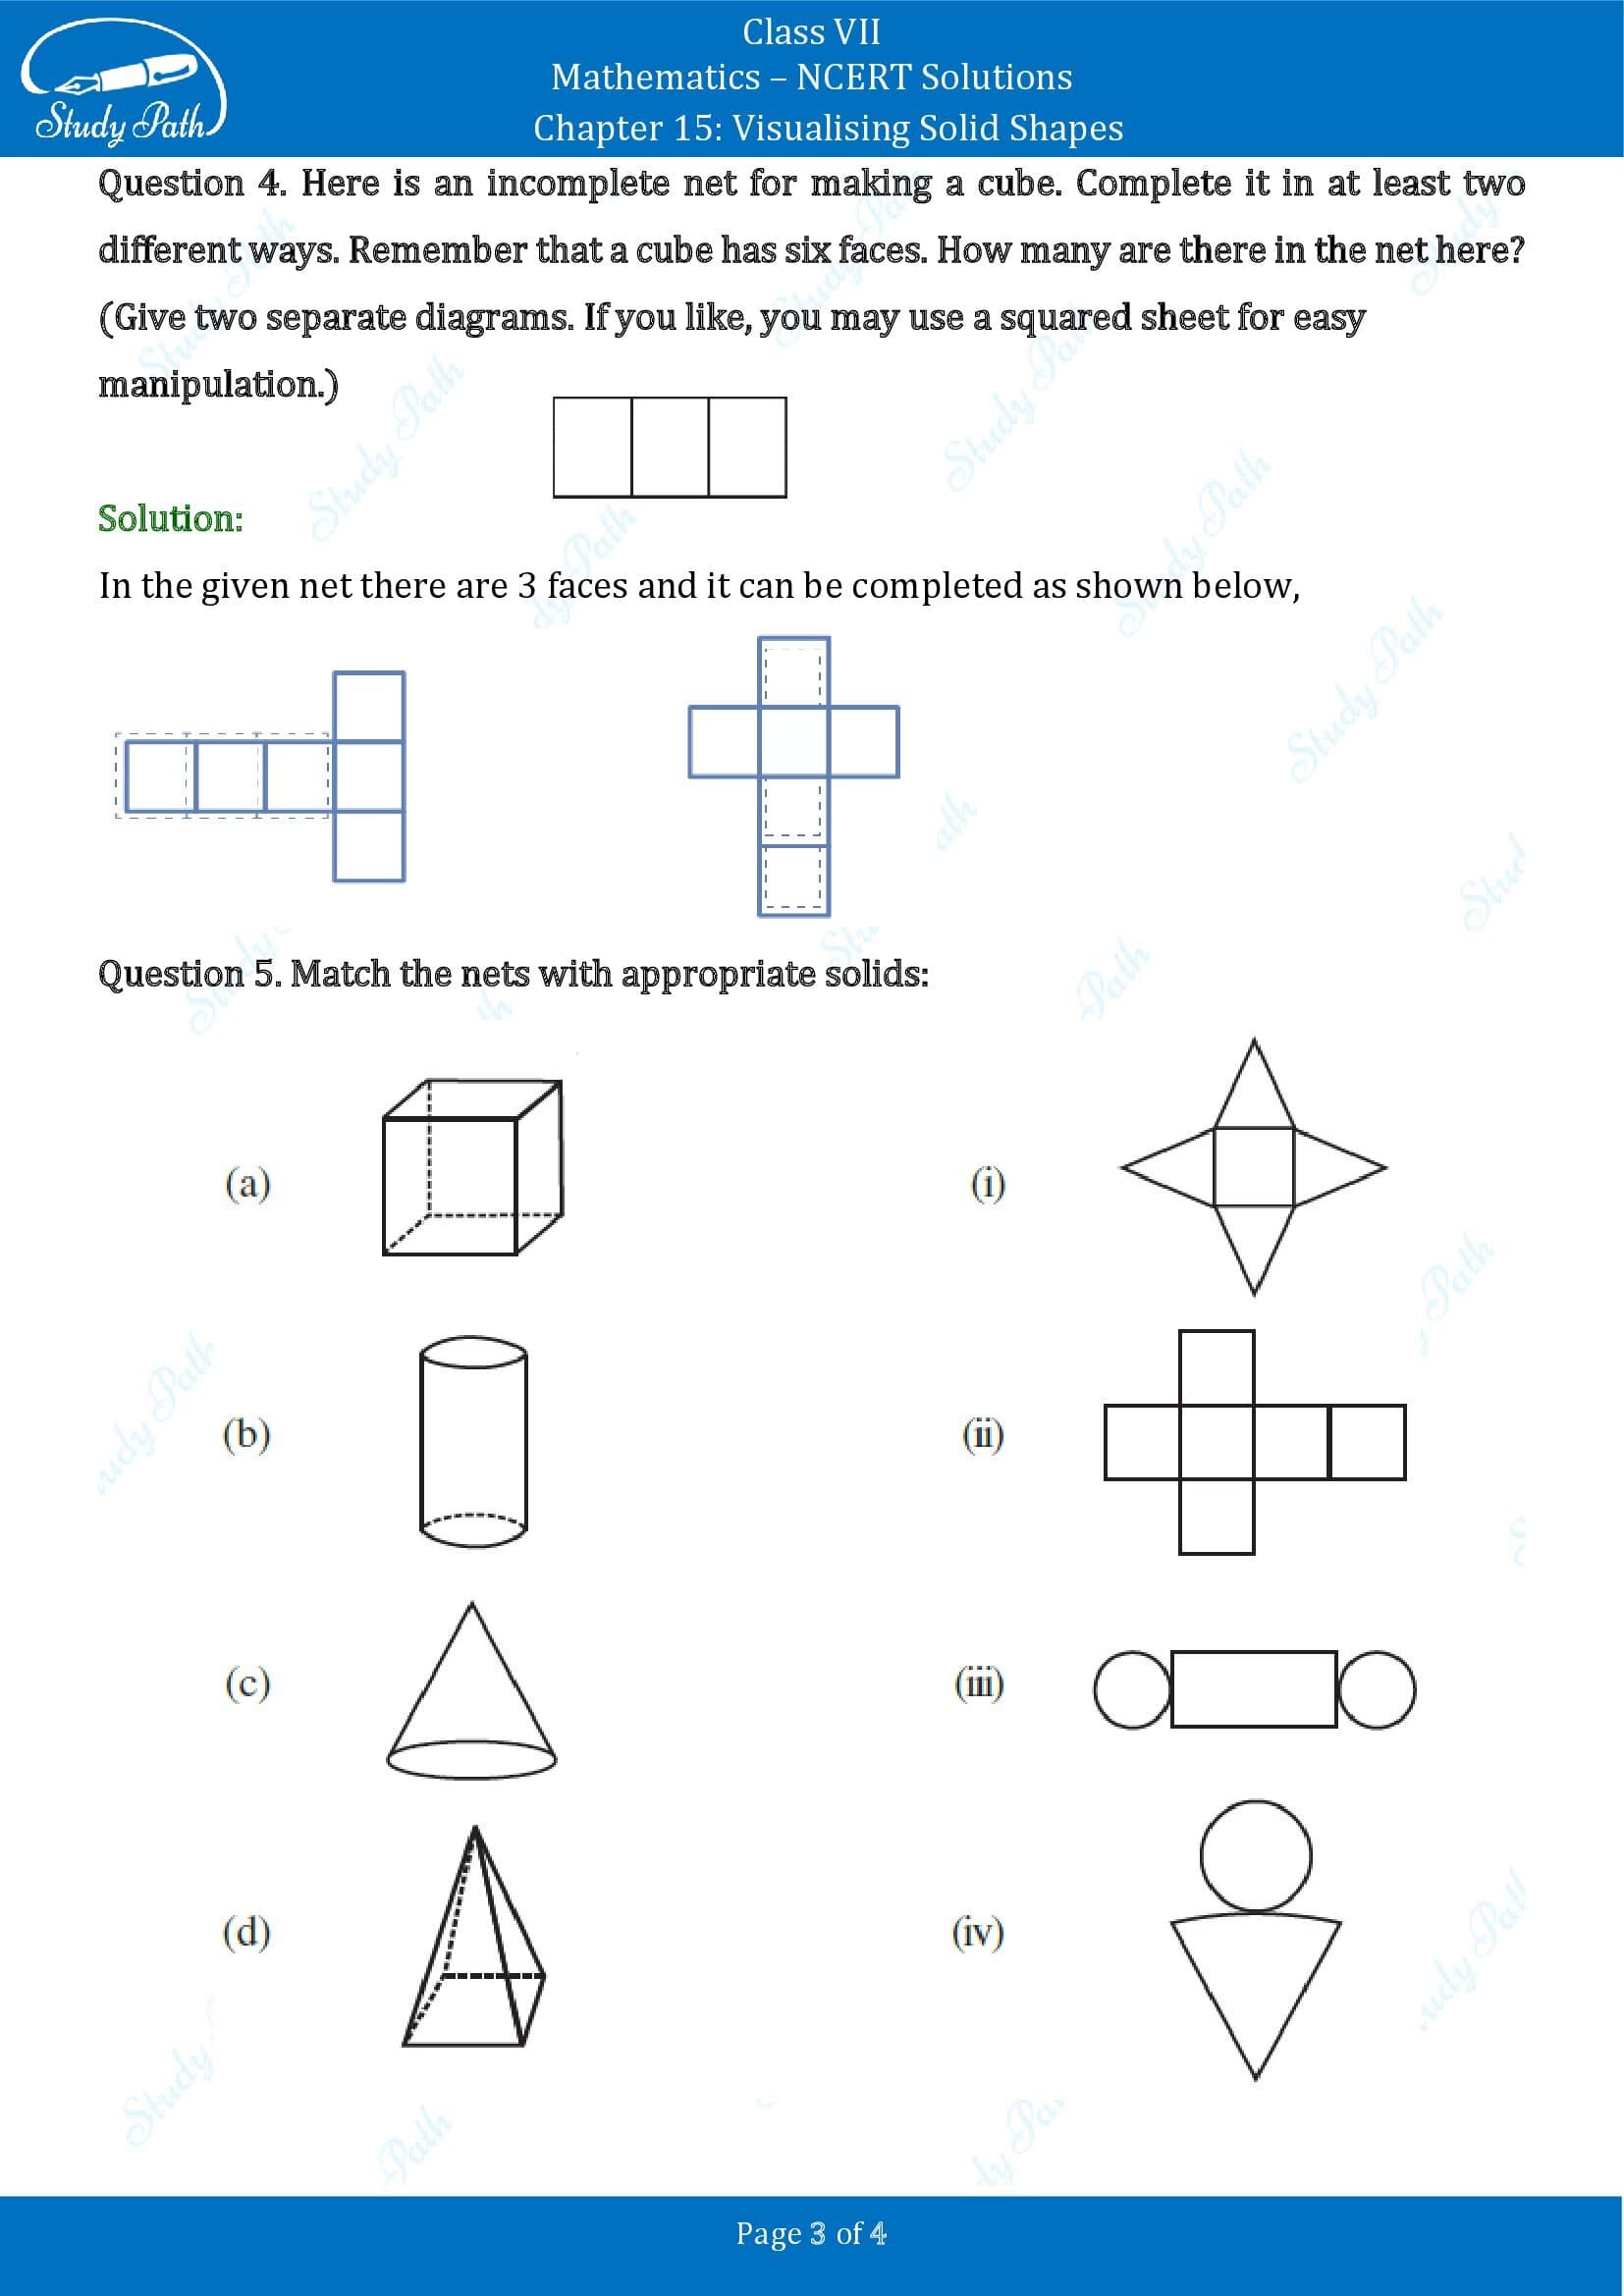 NCERT Solutions for Class 7 Maths Chapter 15 Visualising Solid Shapes Exericse 15.1 00003